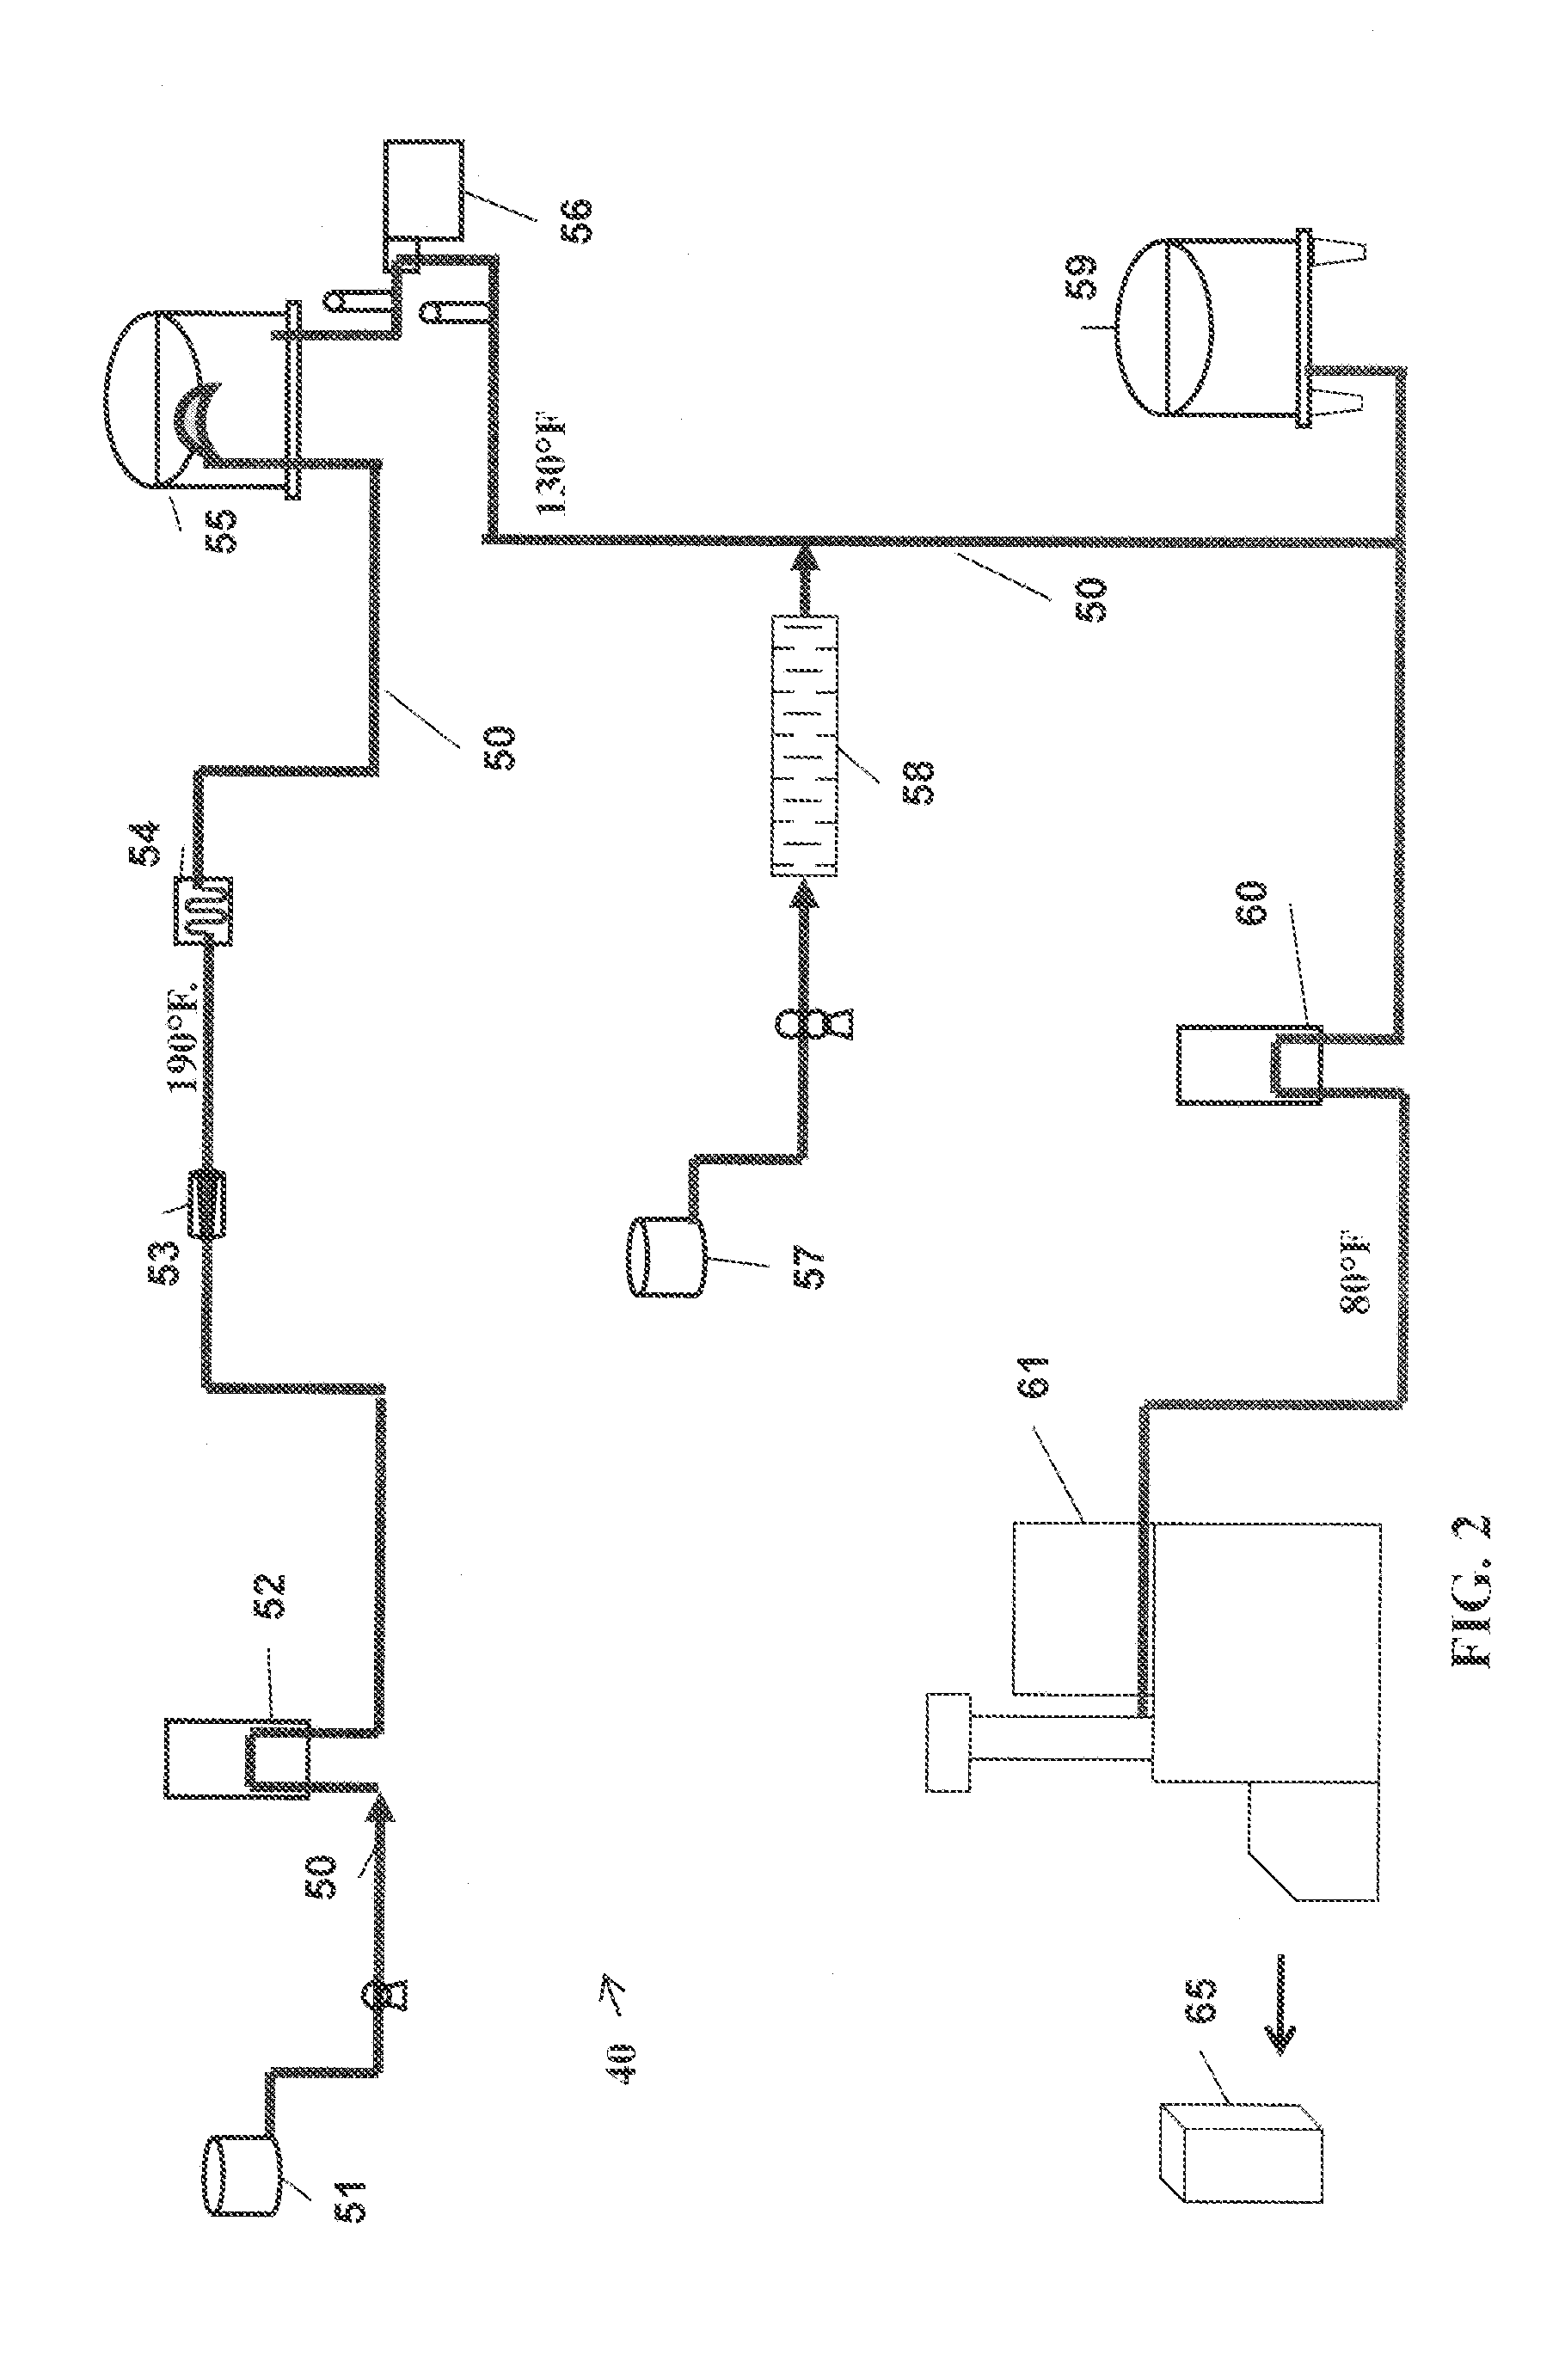 Process For Making A Shelf-Stable Milk Based Beverage Concentrate